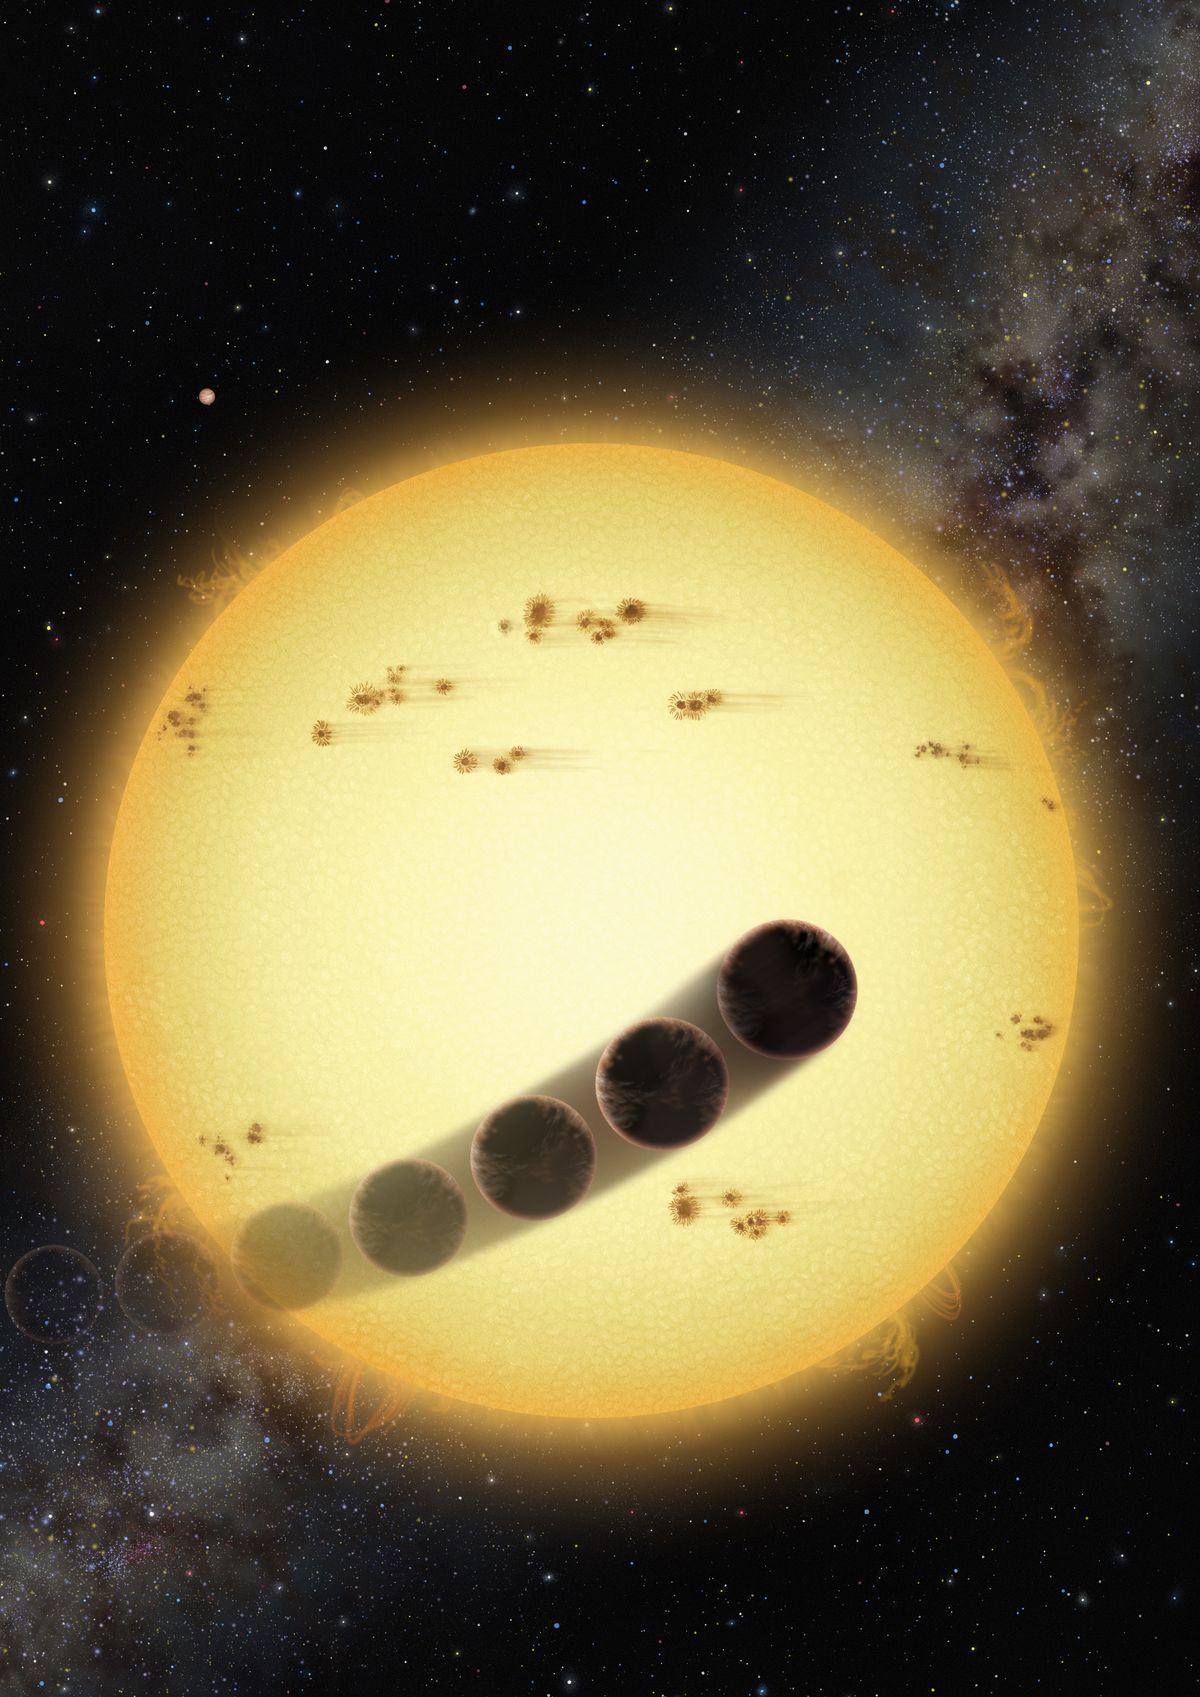 A 'Captured' Alien Planet May Be Hiding at the Edge of Our Solar System